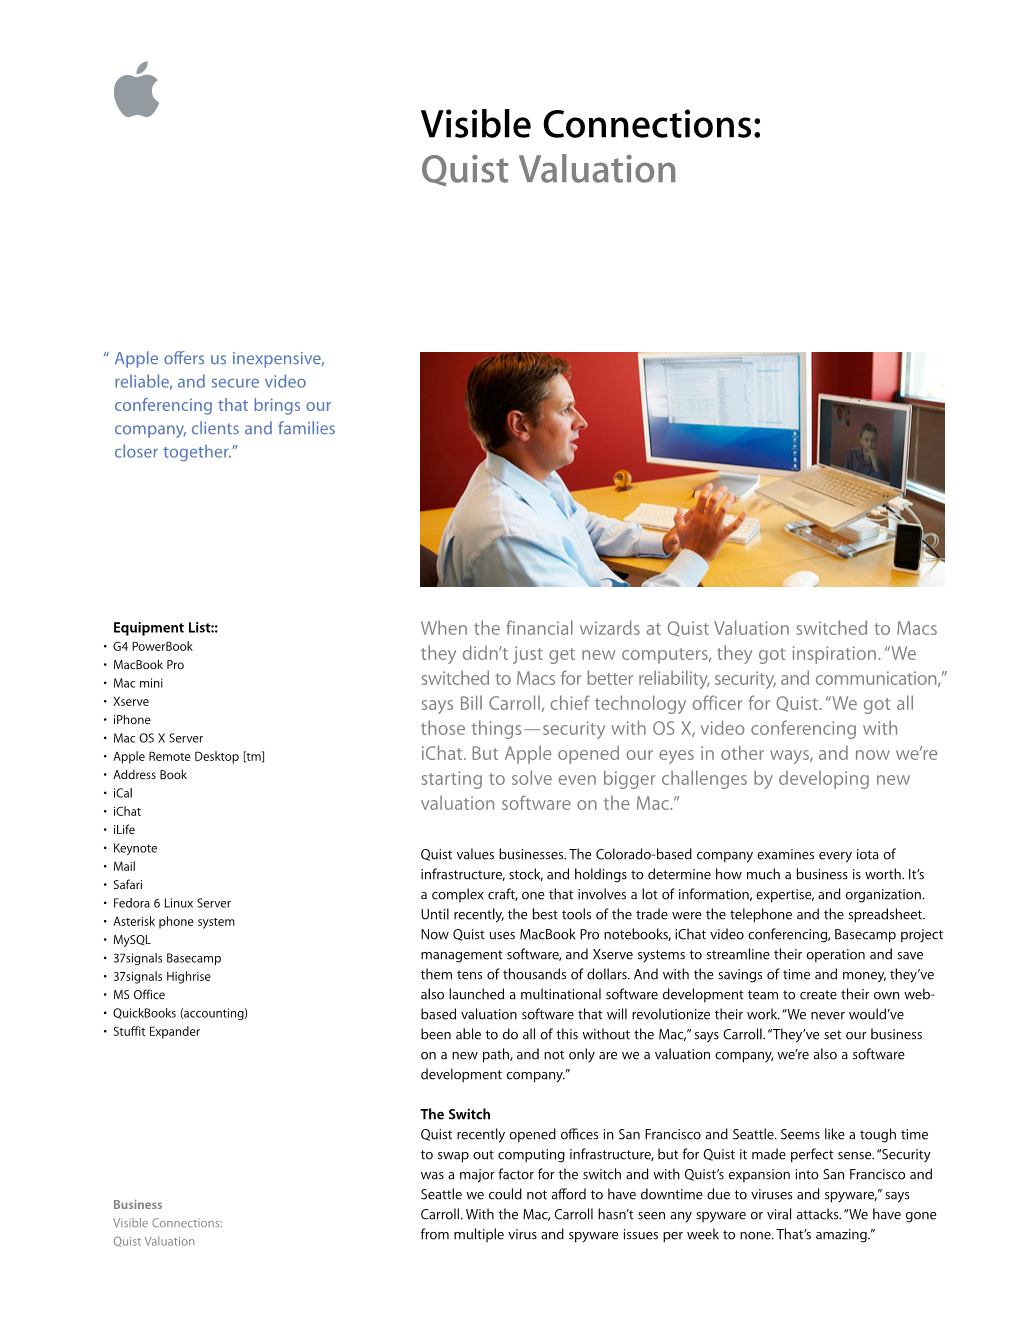 Visible Connections: Quist Valuation